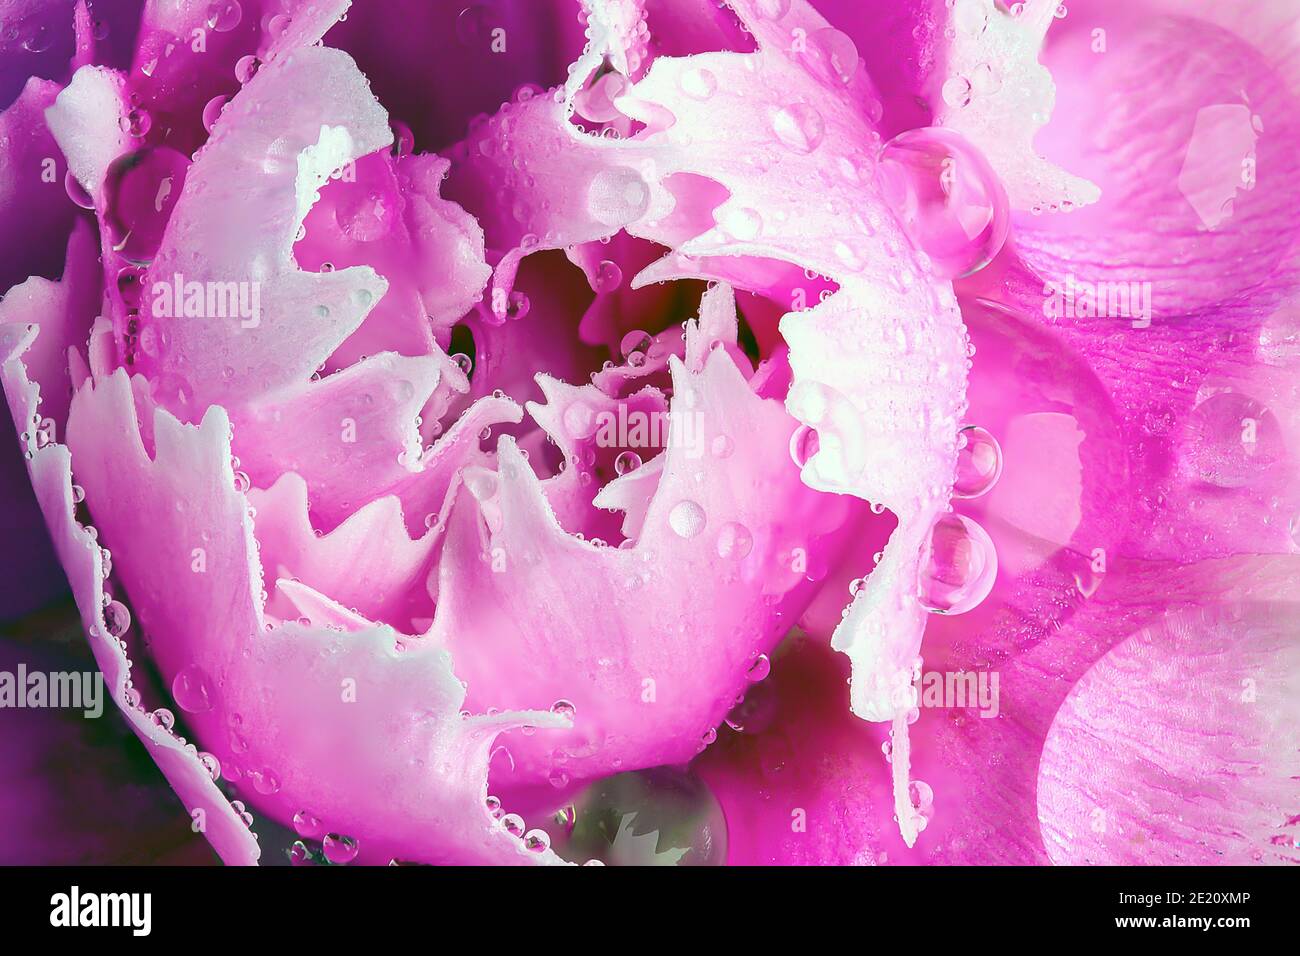 Pink peony flower head in super macro close up. Water rain drops covering the petals. Garden plant in the process of opening Stock Photo